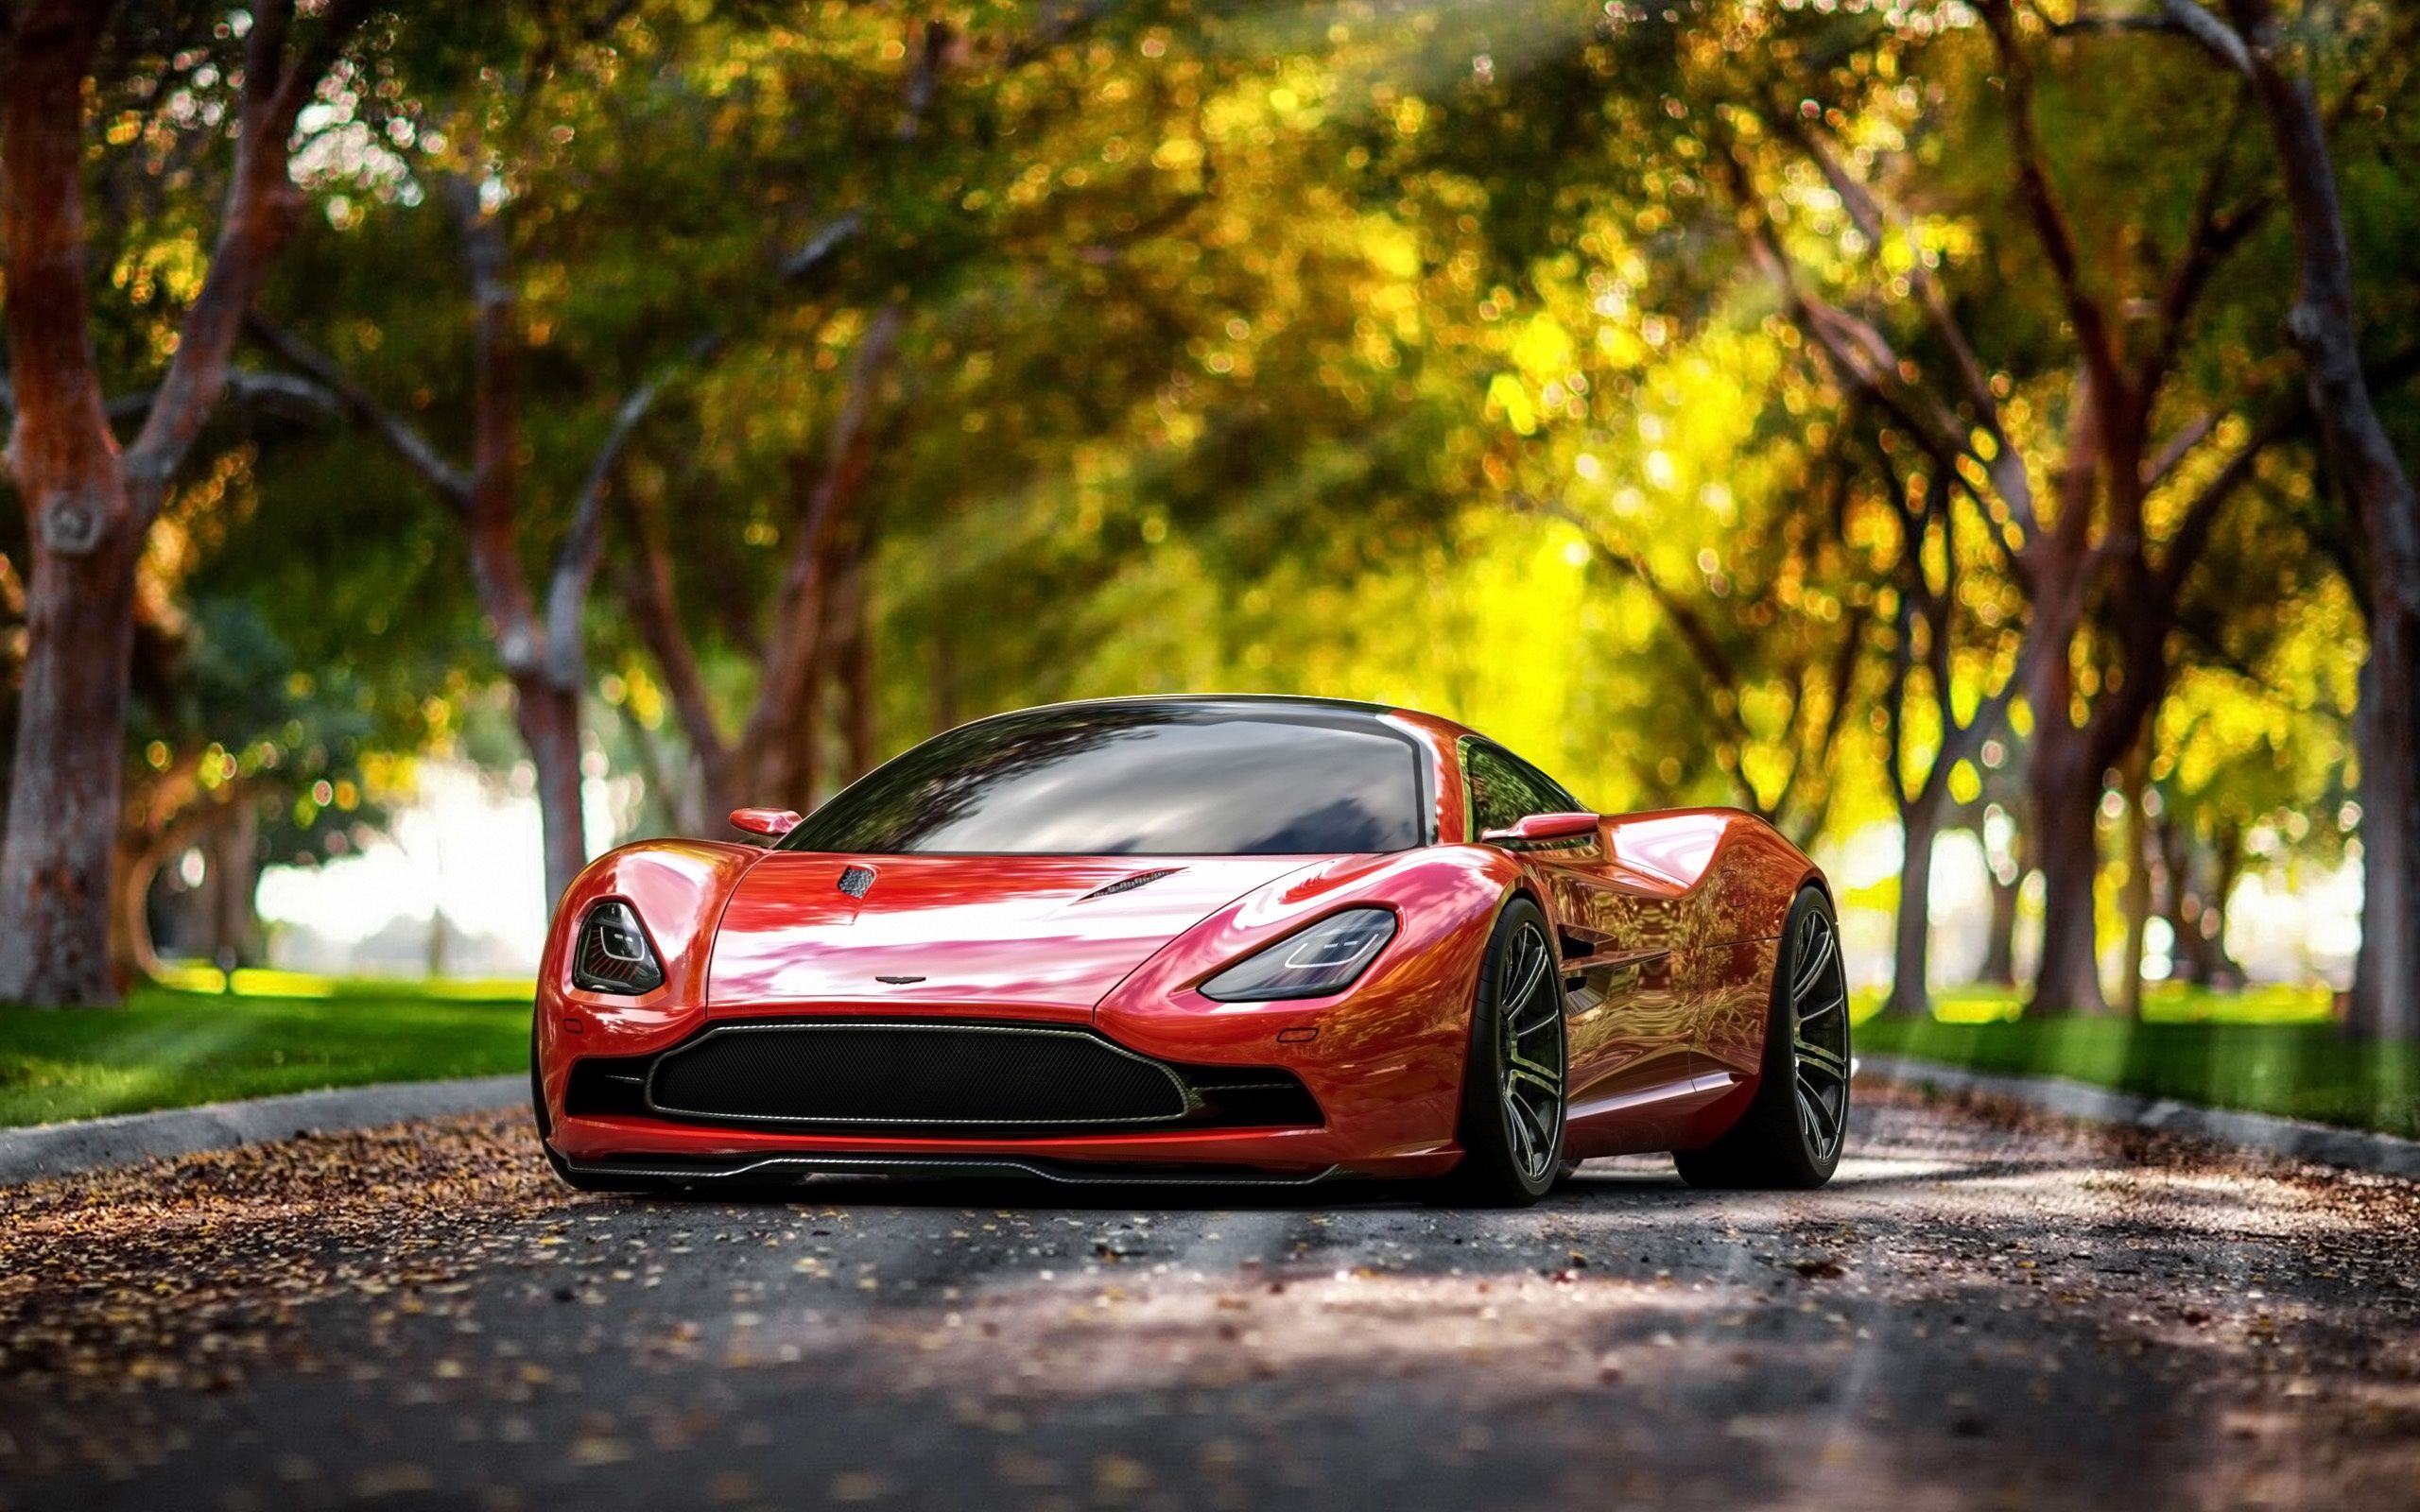 2013 Aston Martin DBC Concept Wallpapers | HD Wallpapers